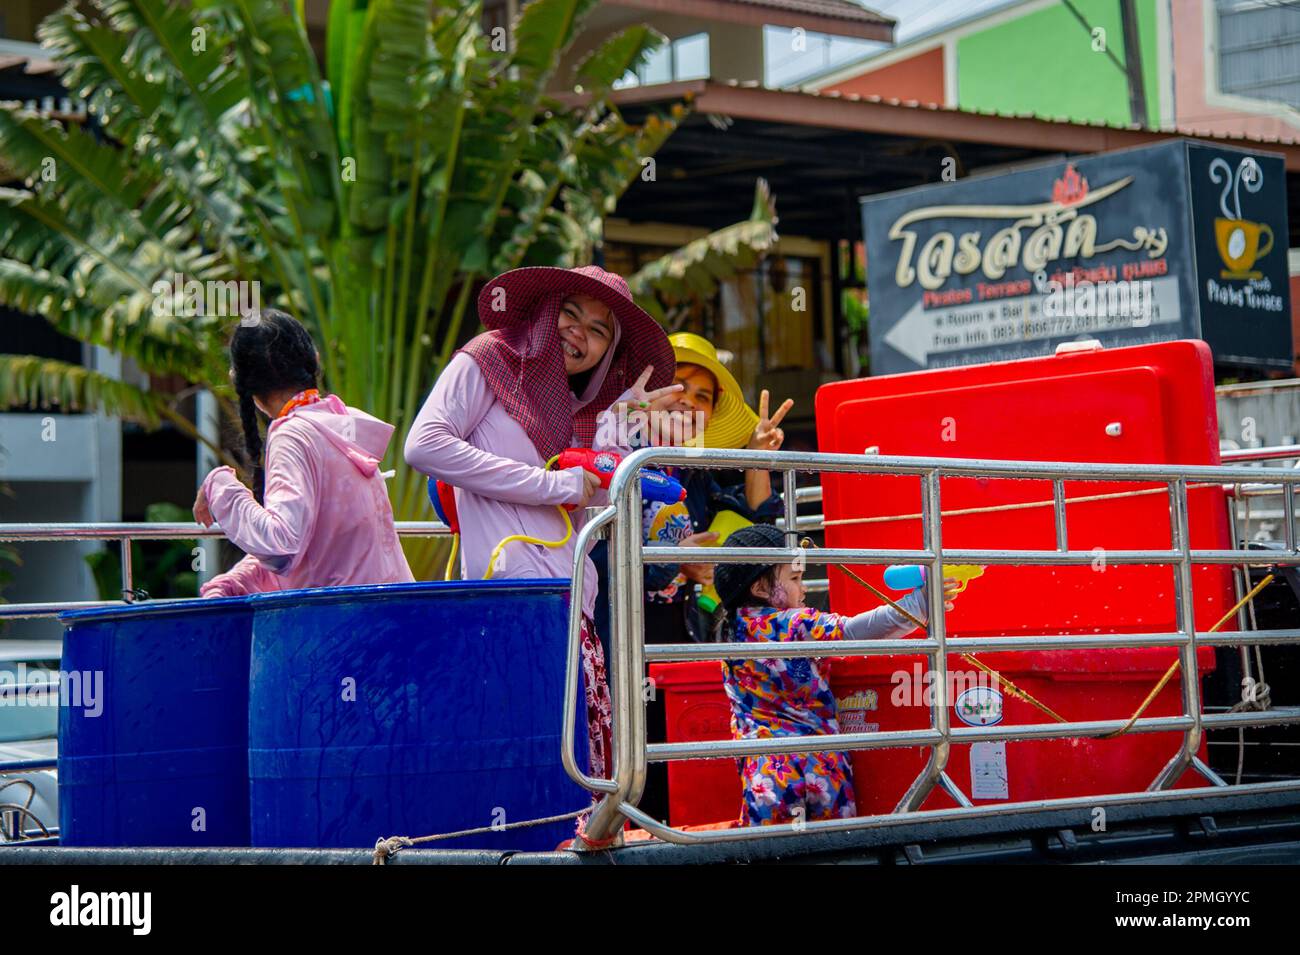 April 13 2023-Thung Wua Laen Beach - Chumphon area: Crowds celebrate Songkran, Thai New Year, by splashing each other with colored water or painting e Stock Photo